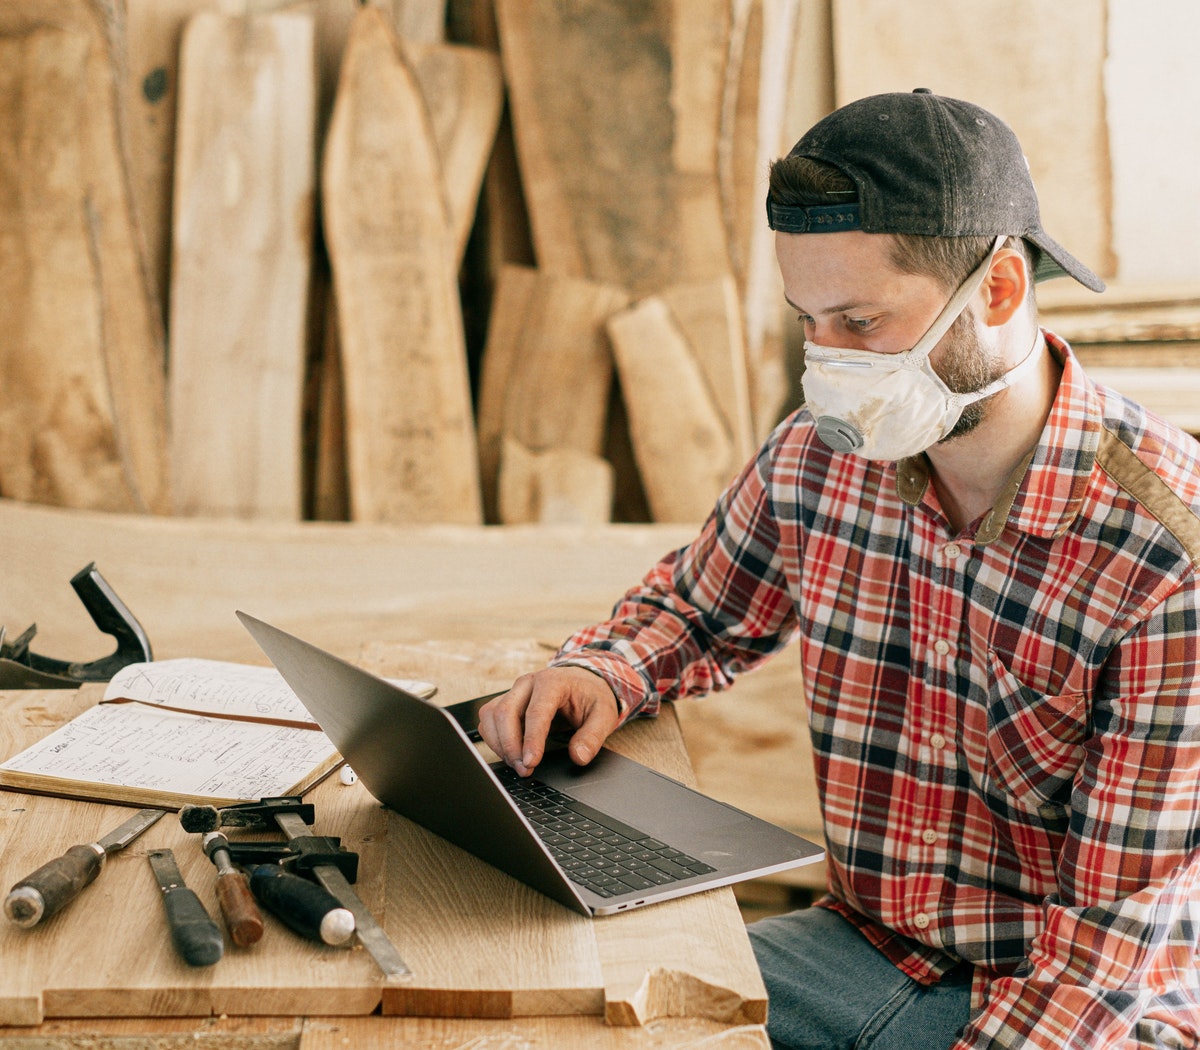 Man with mask over his face on his laptop, while tools lay on his side.